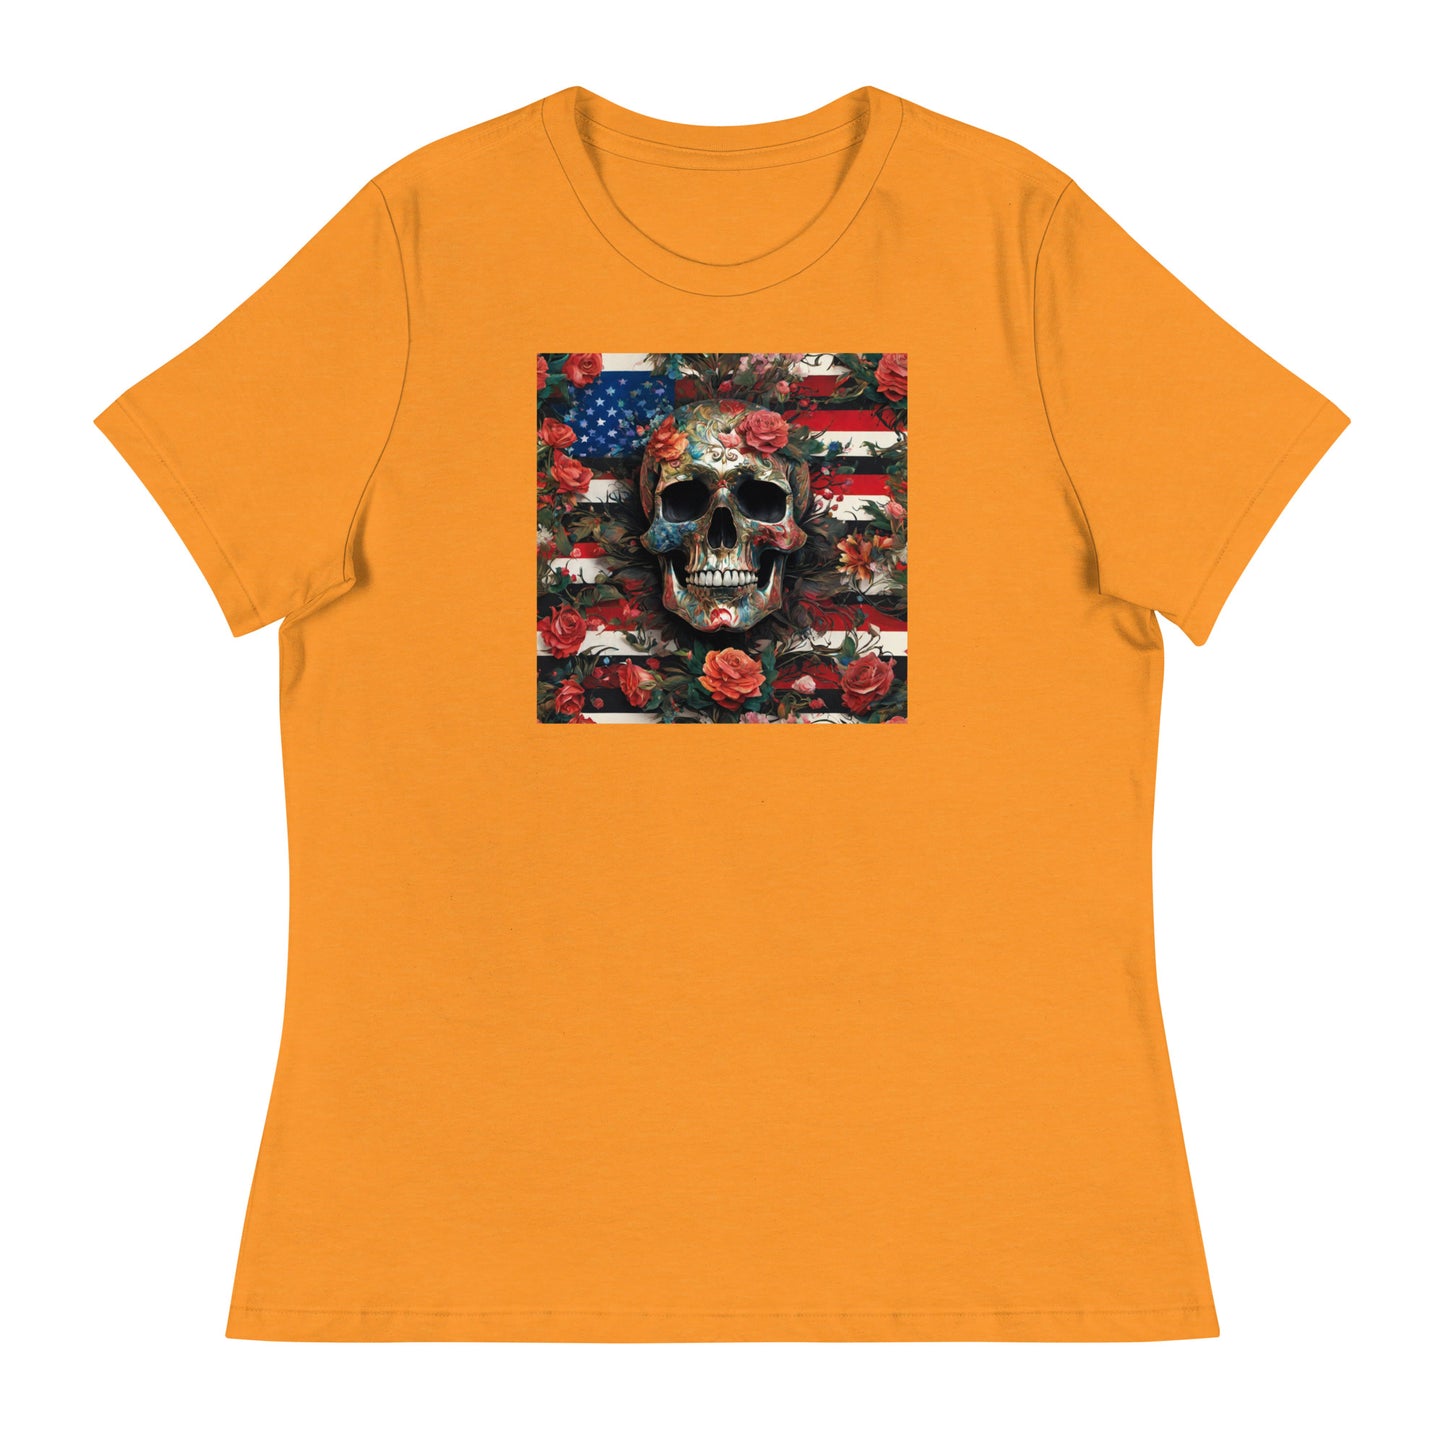 Skull, Roses, and Flag Women's Graphic T-Shirt Heather Marmalade